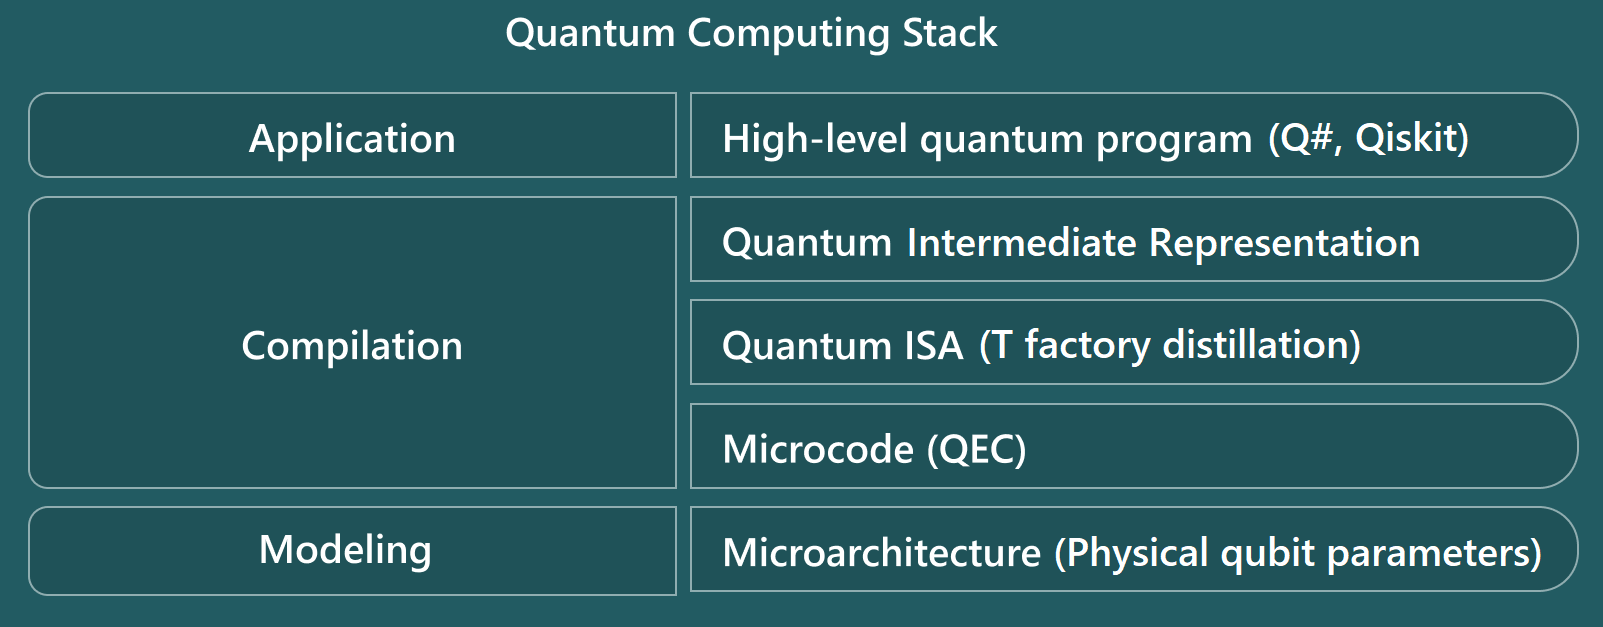 Diagram showing the levels of the quantum computing stack of the Resource Estimator.